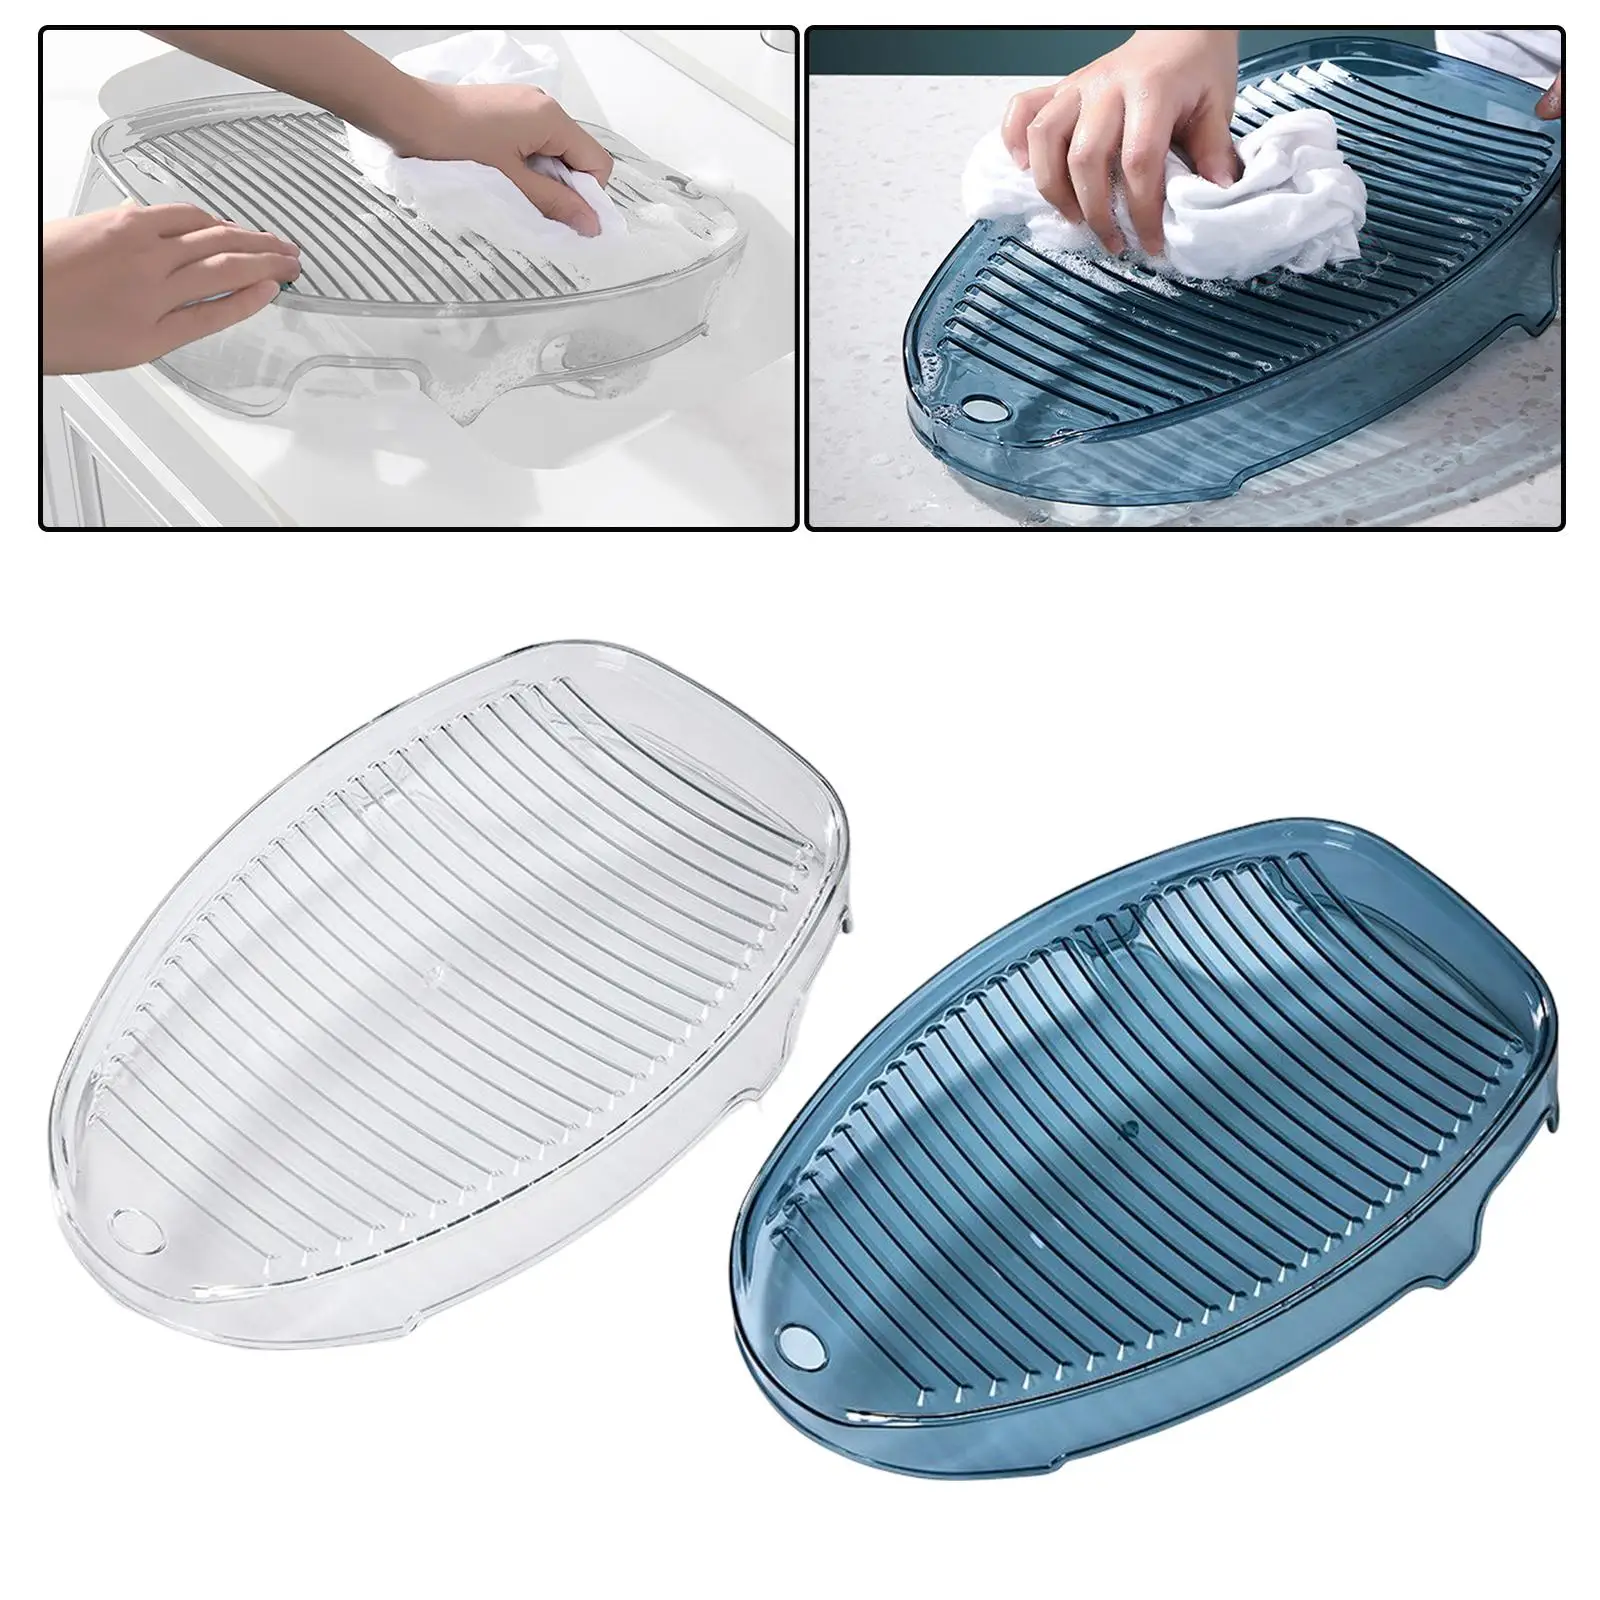 Hand Washing Board Laundry Cleaning Tool Durable Anti Slip Practical Thicken Laundry Board for Pants Underwear Shirts Household